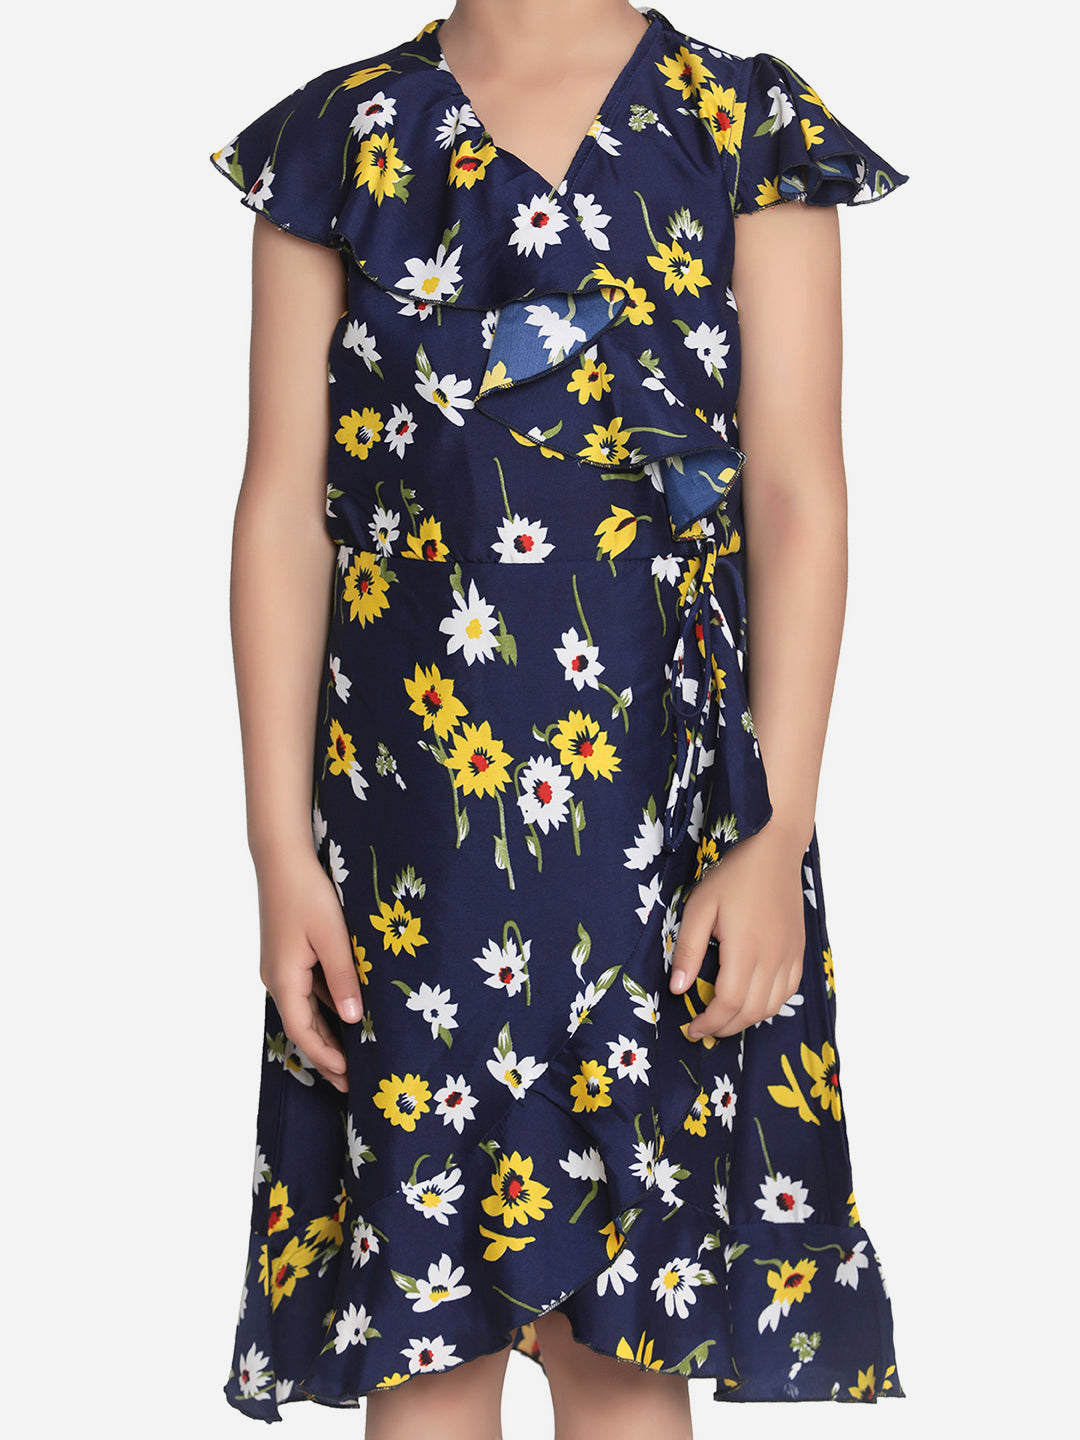 Girls Navy Floral Polyester Crepe Dress with Ruffle